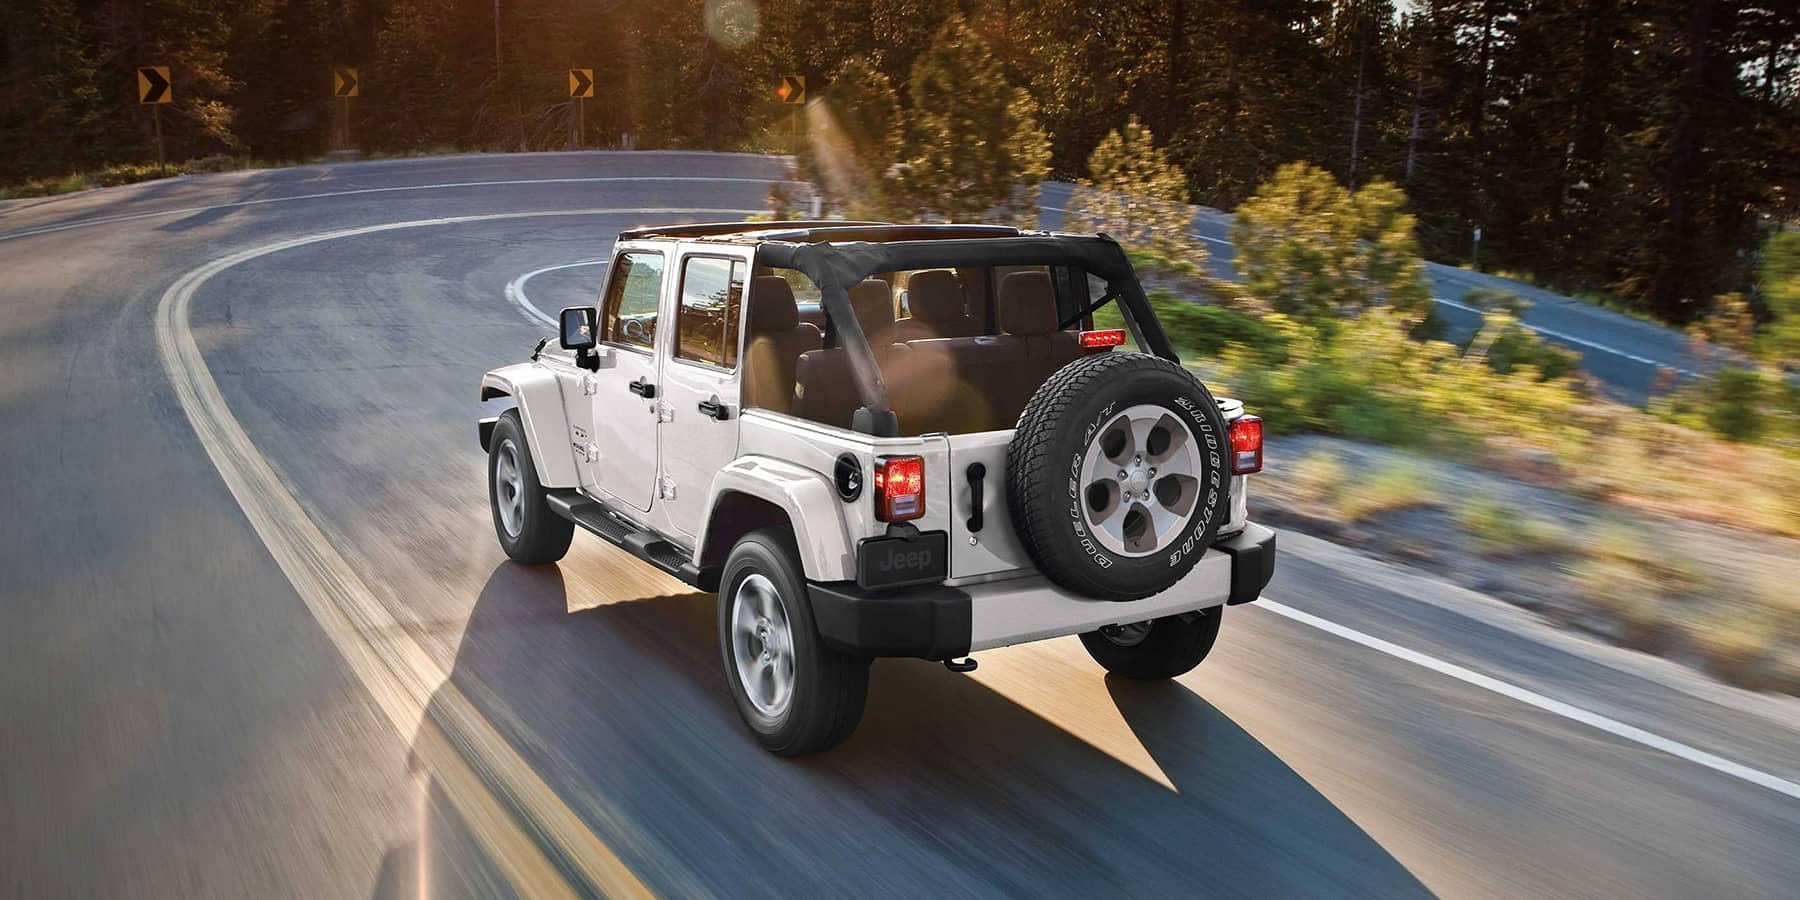 2017 Jeep Wrangler Specs & Features | Whitten Brothers of Ashland